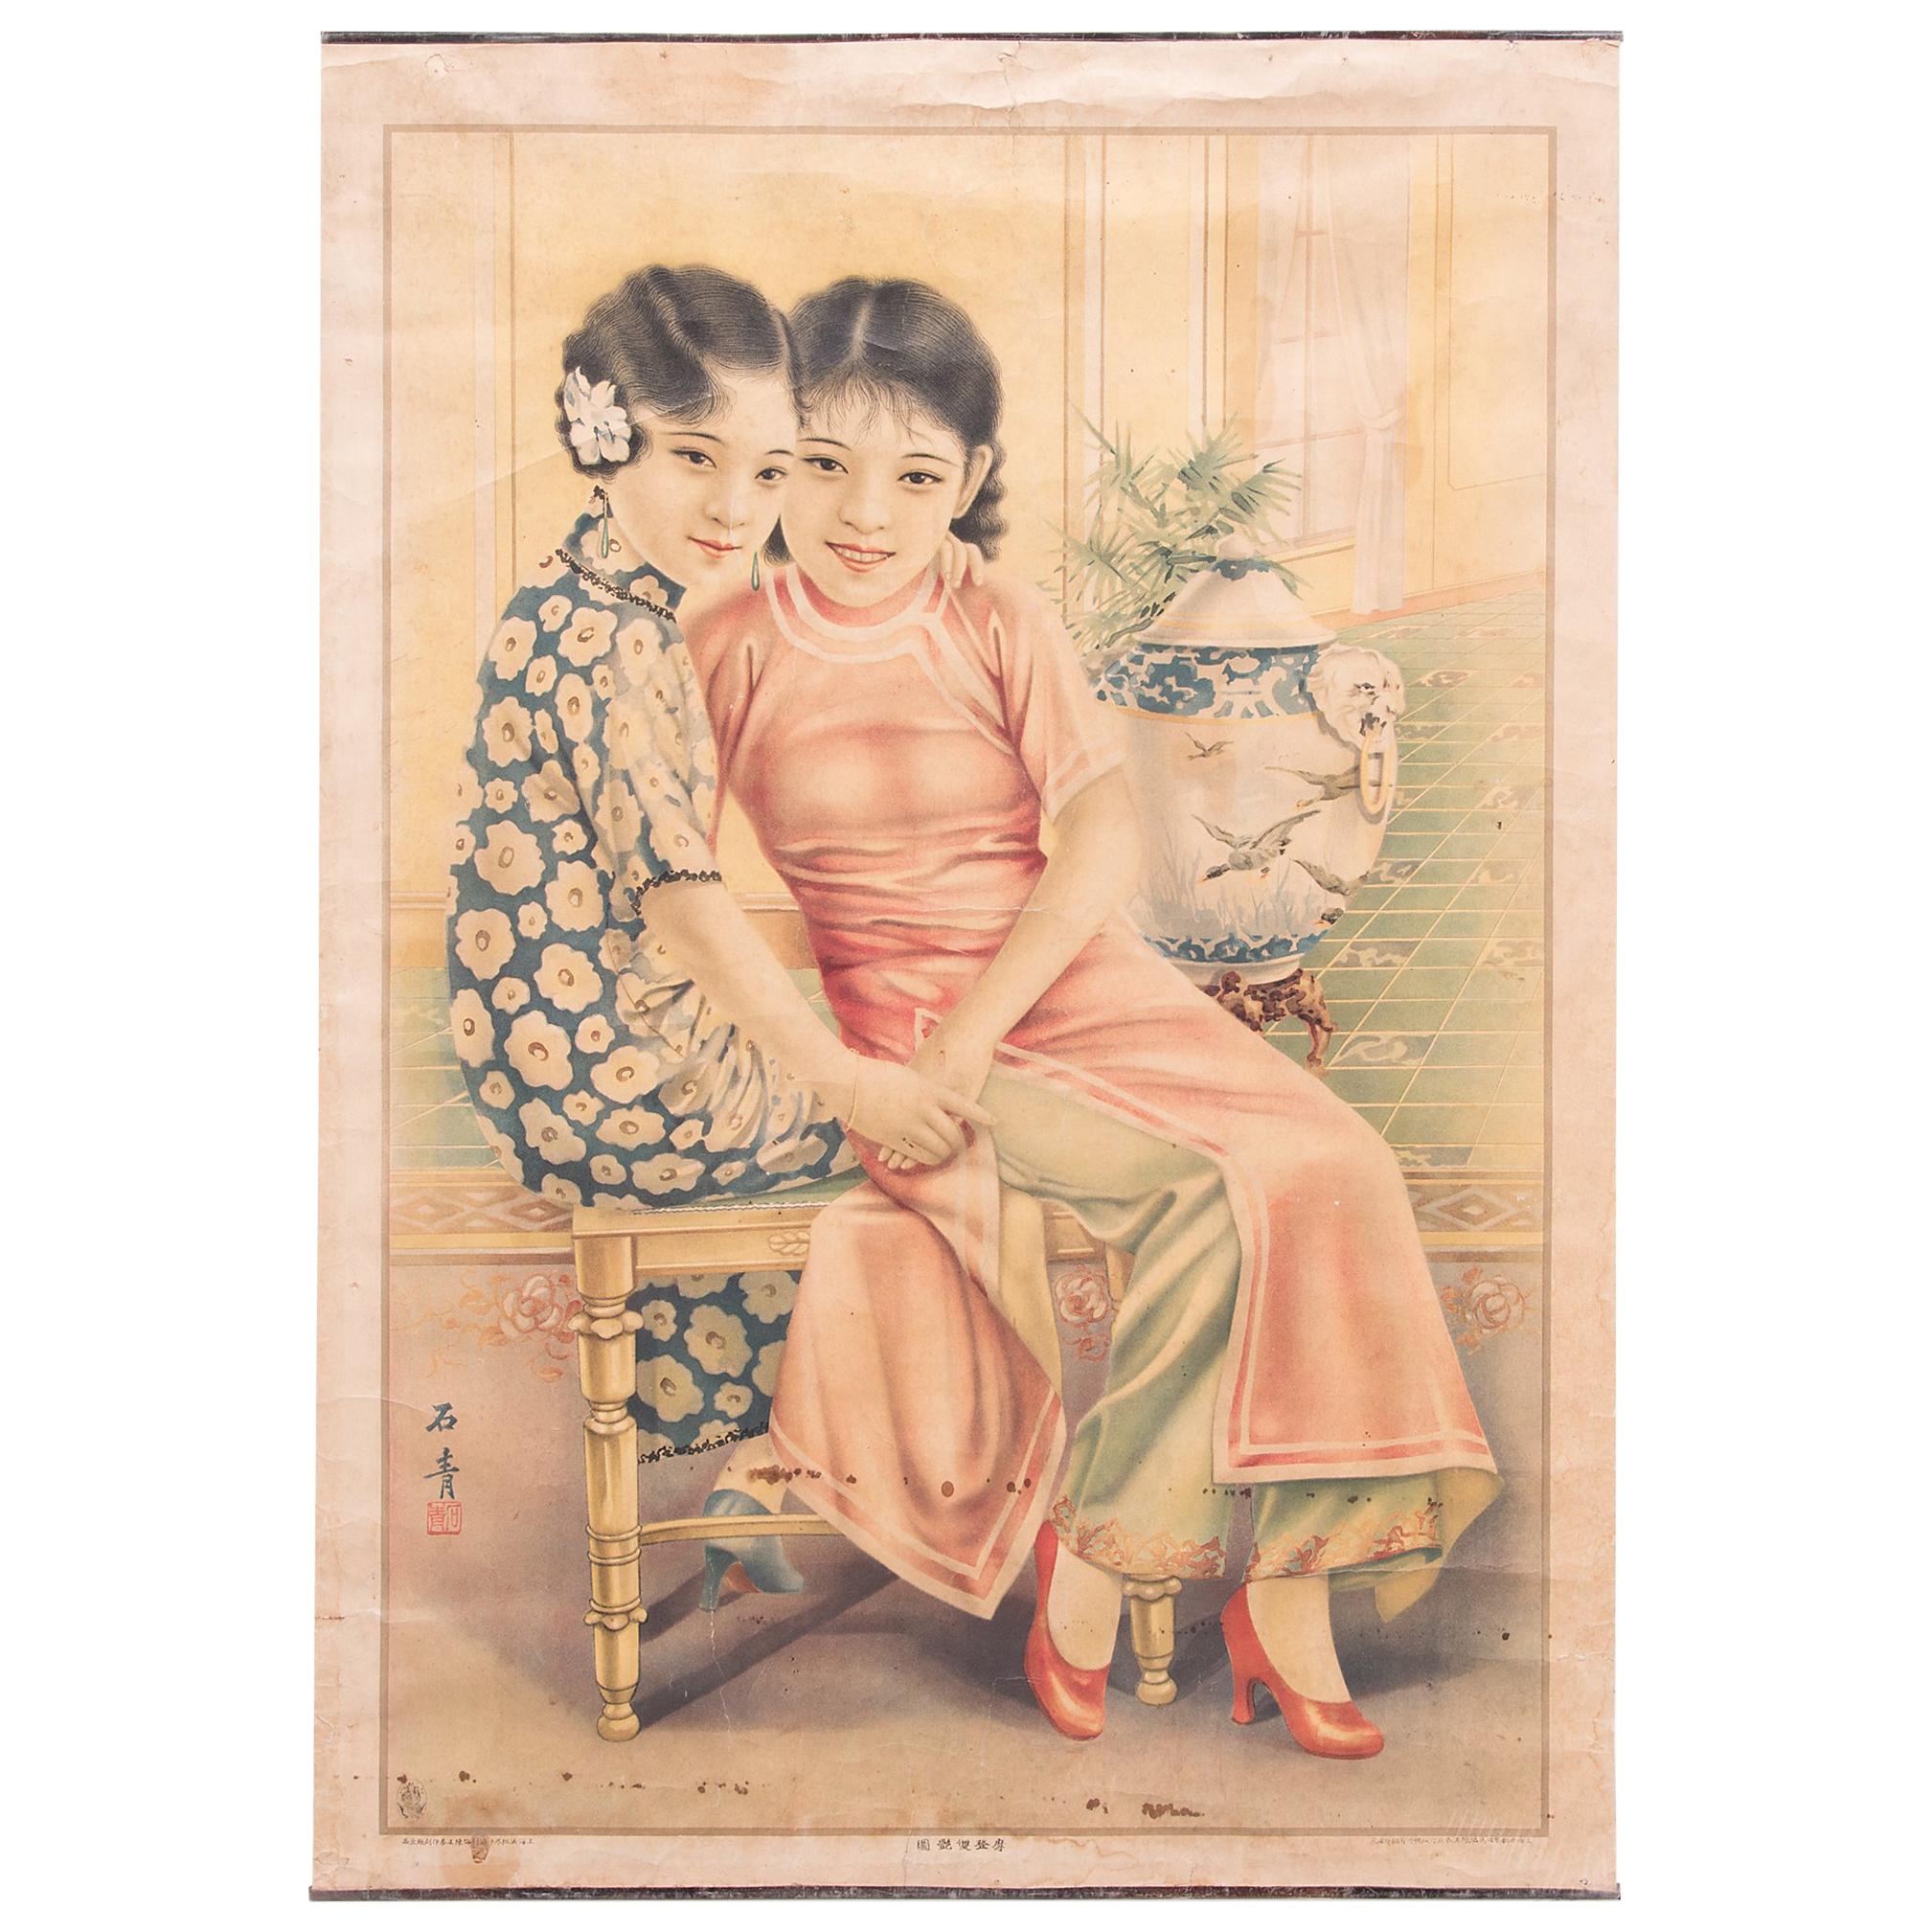 Vintage Chinese Deco Advertisement Poster